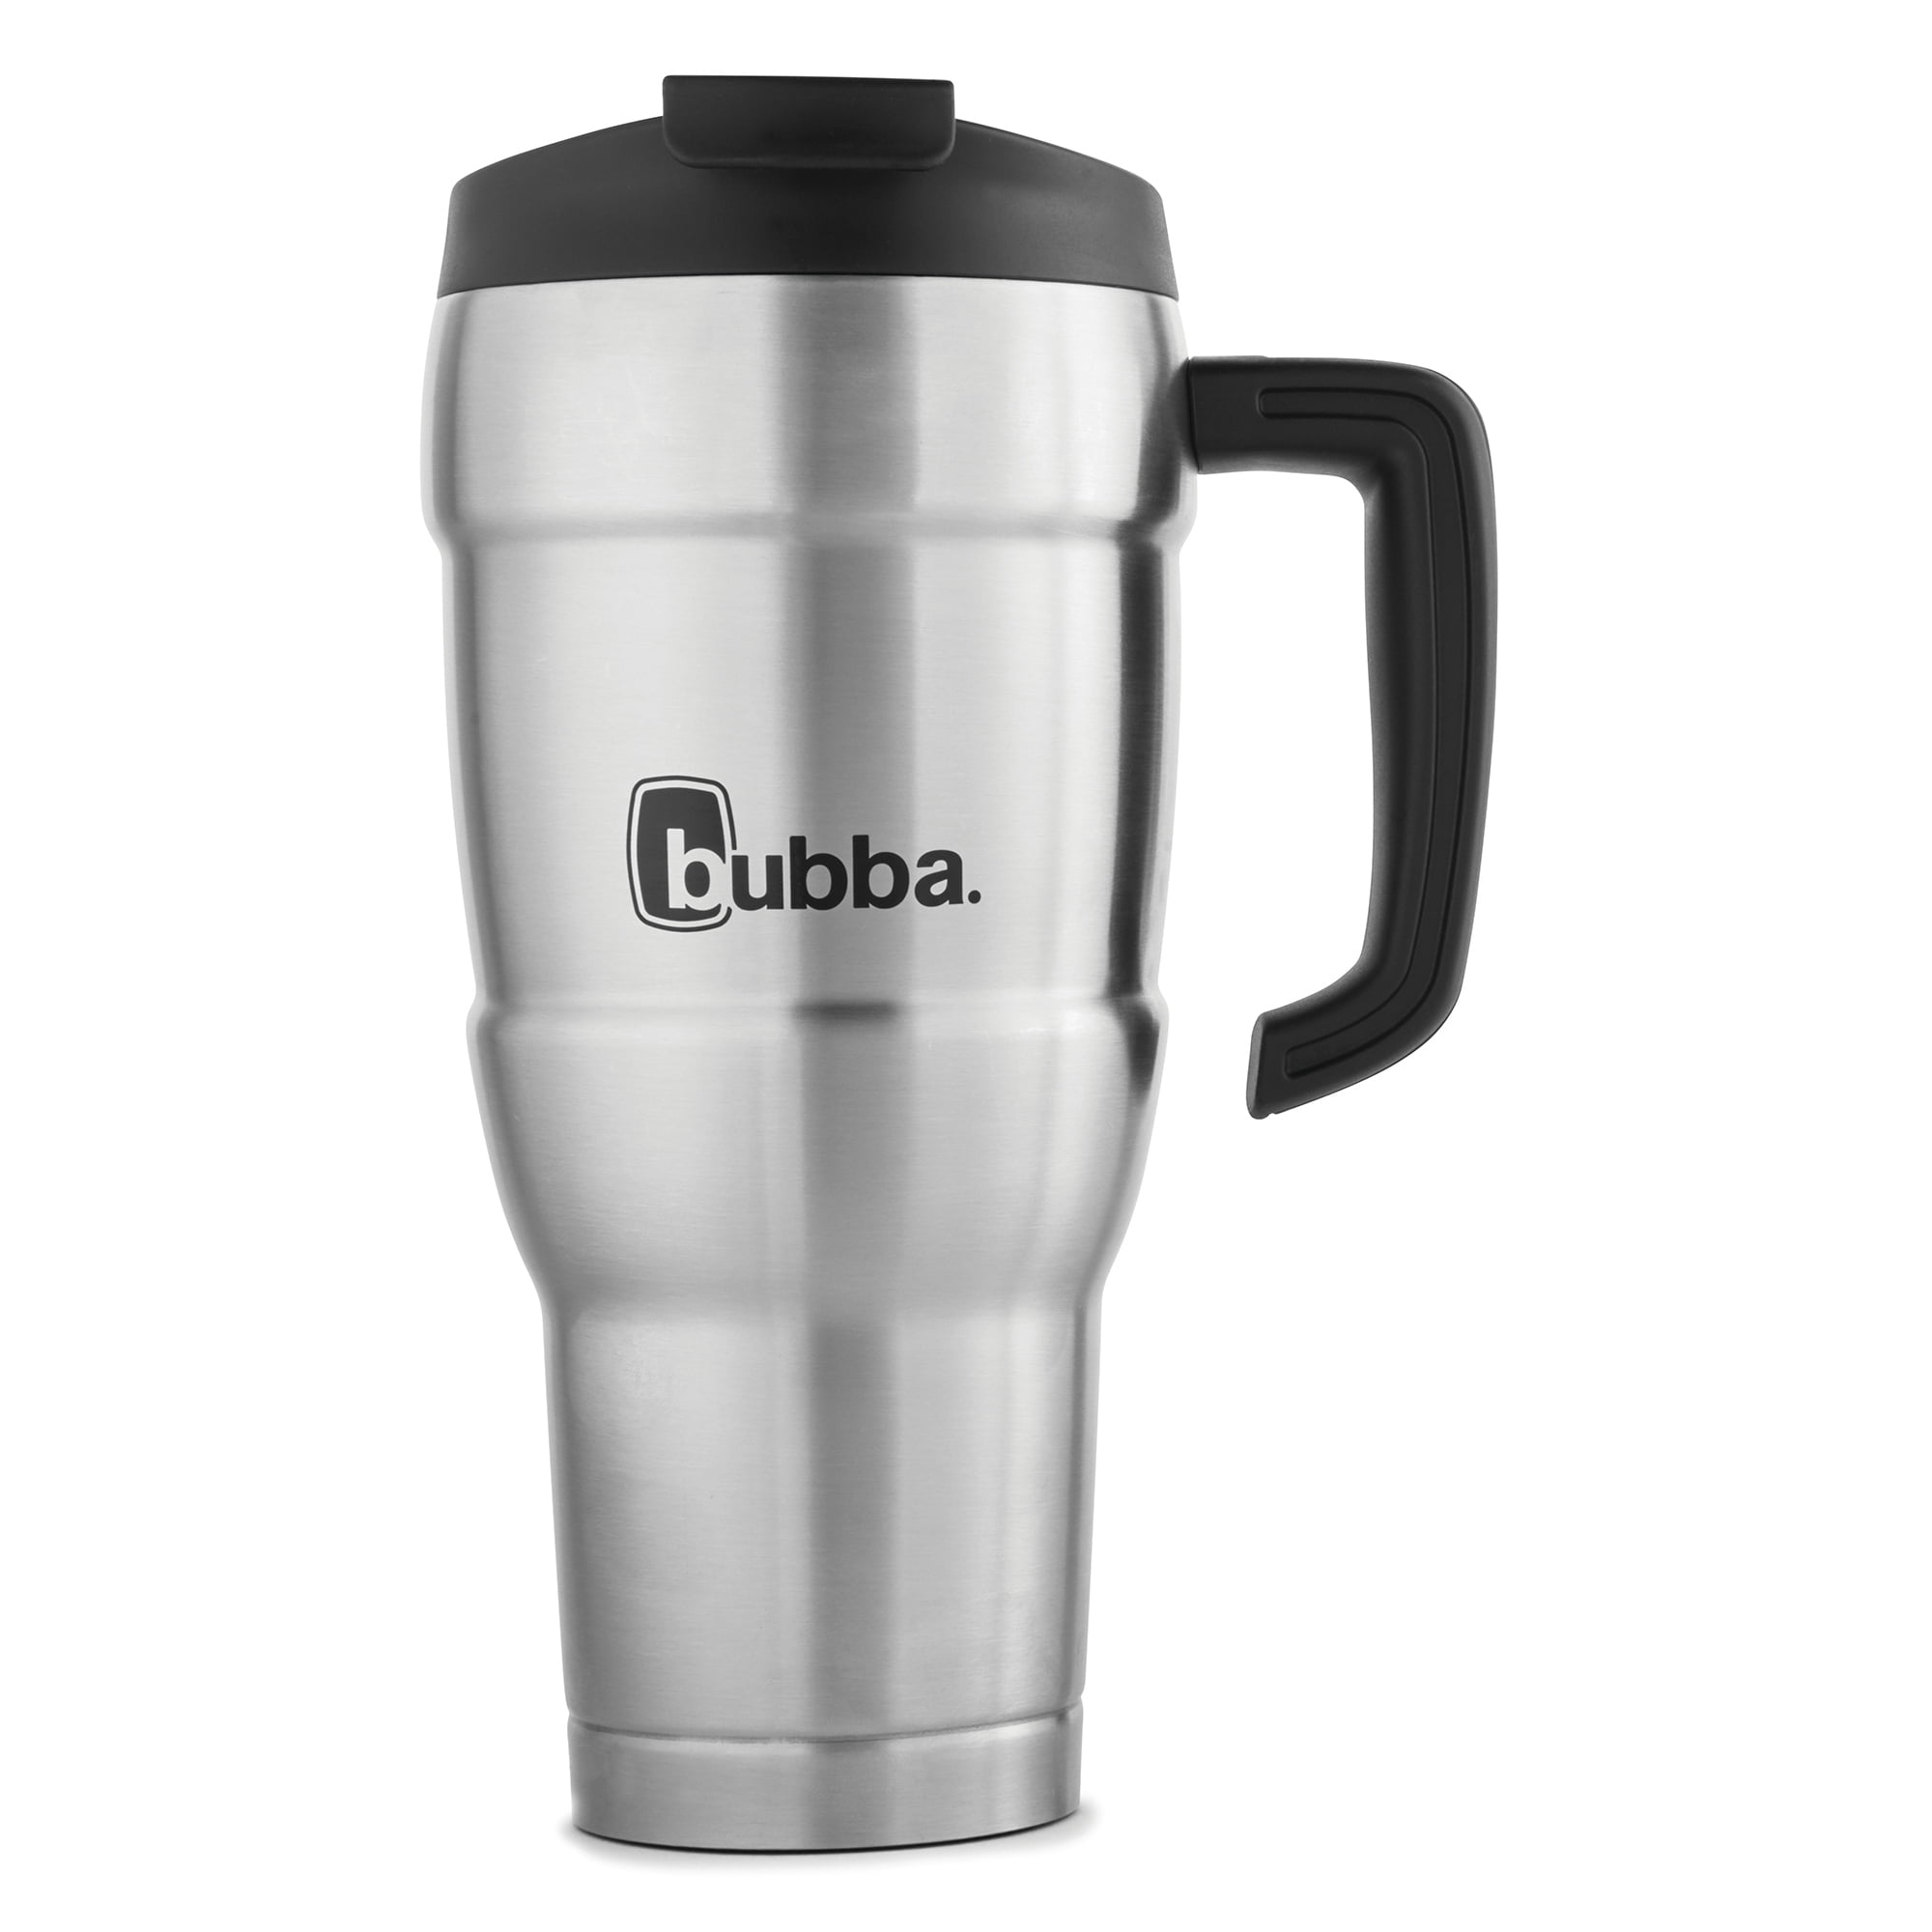 bubba Hero XL Stainless Steel Travel Mug with Handle Stainless